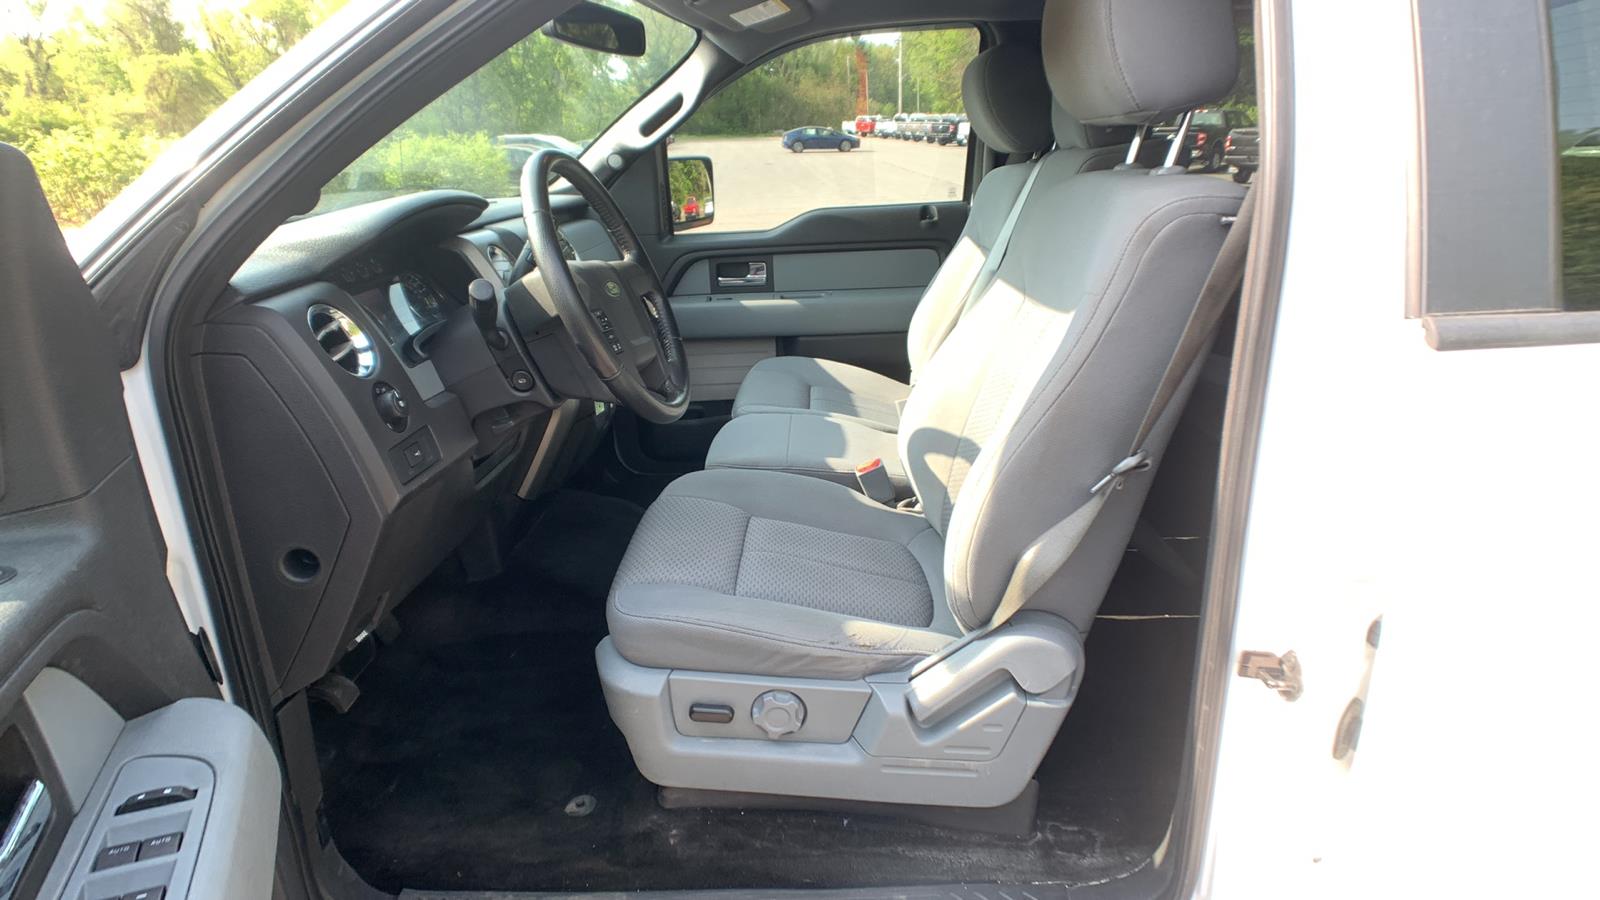 2013 Ford F-150 Short Bed,Crew Cab Pickup